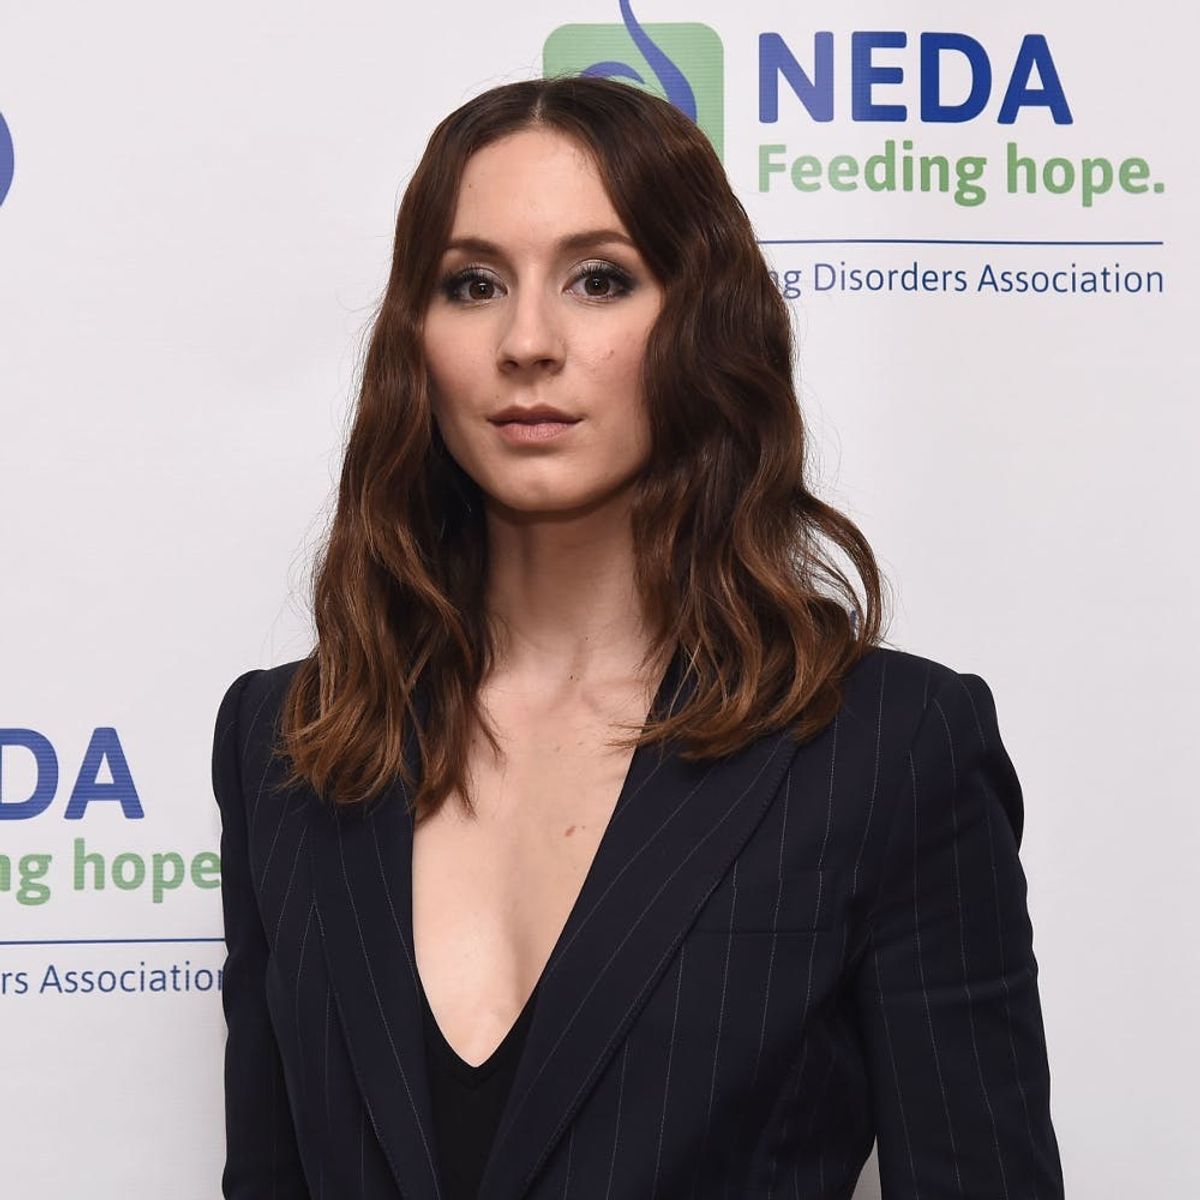 Pretty Little Liars’ Troian Bellisario Opens Up About Her Struggle With Mental Health